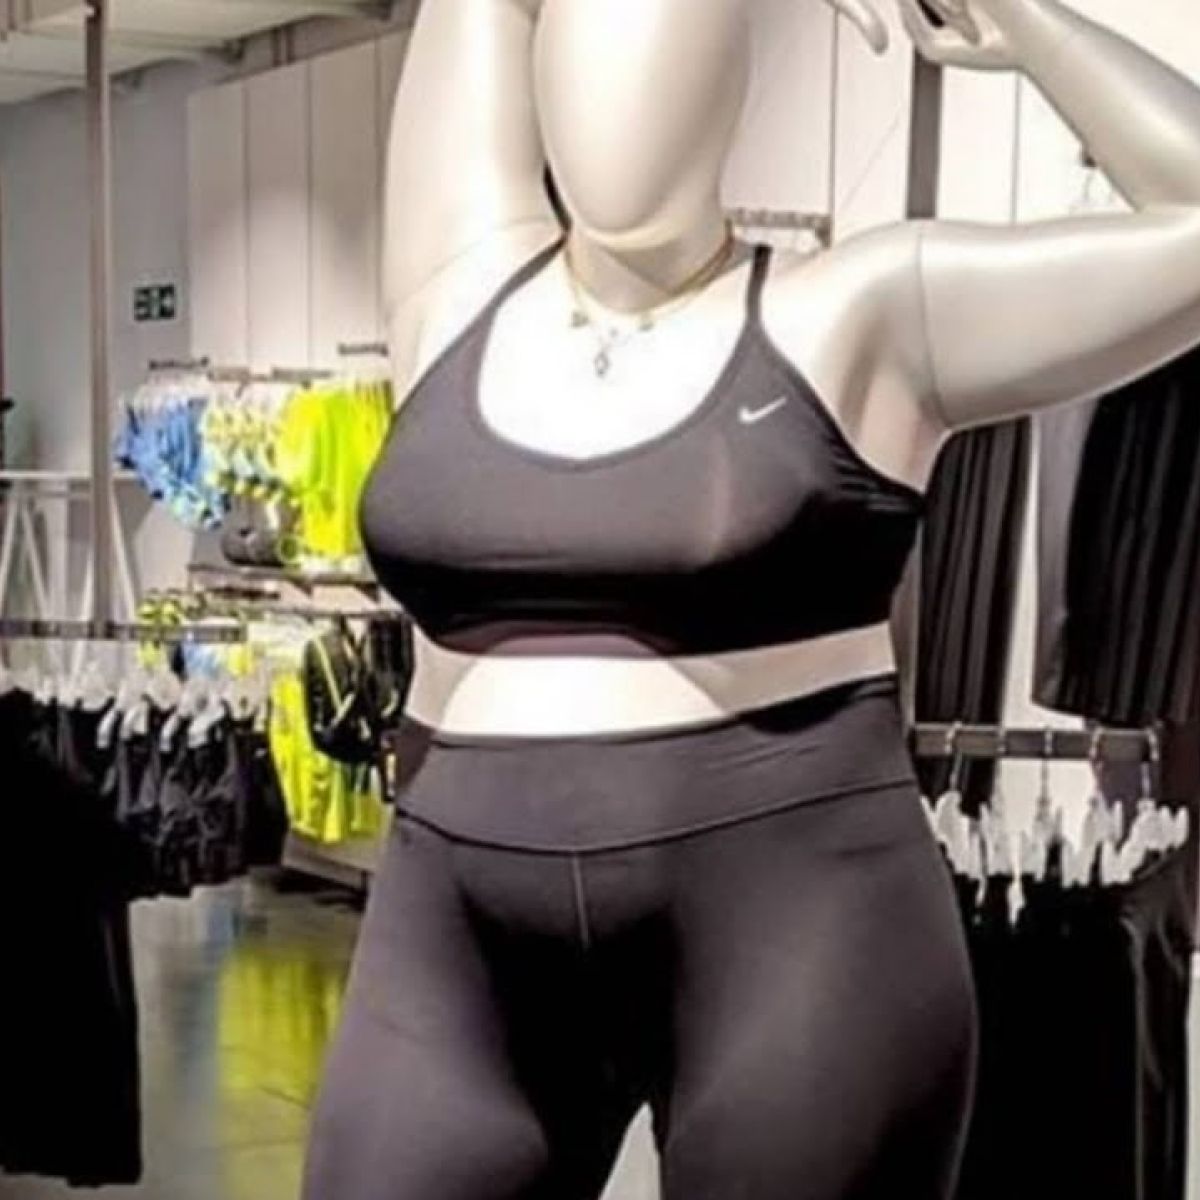 Even Nike's size-16 mannequin isn't 